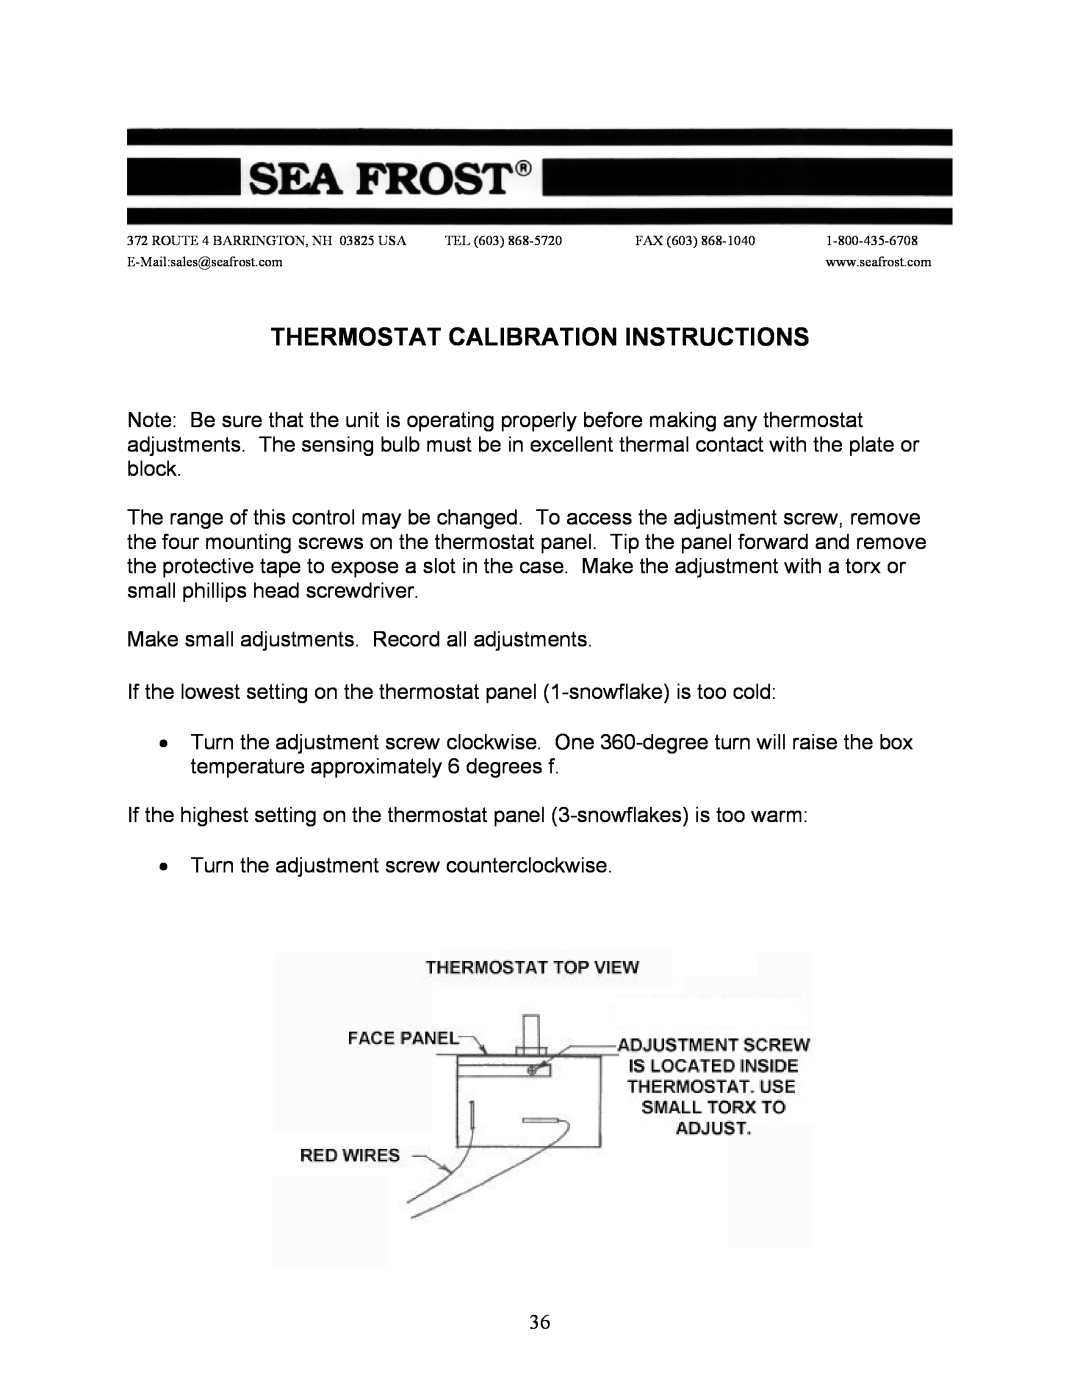 Sea Frost BG 2000 installation instructions Thermostat Calibration Instructions 